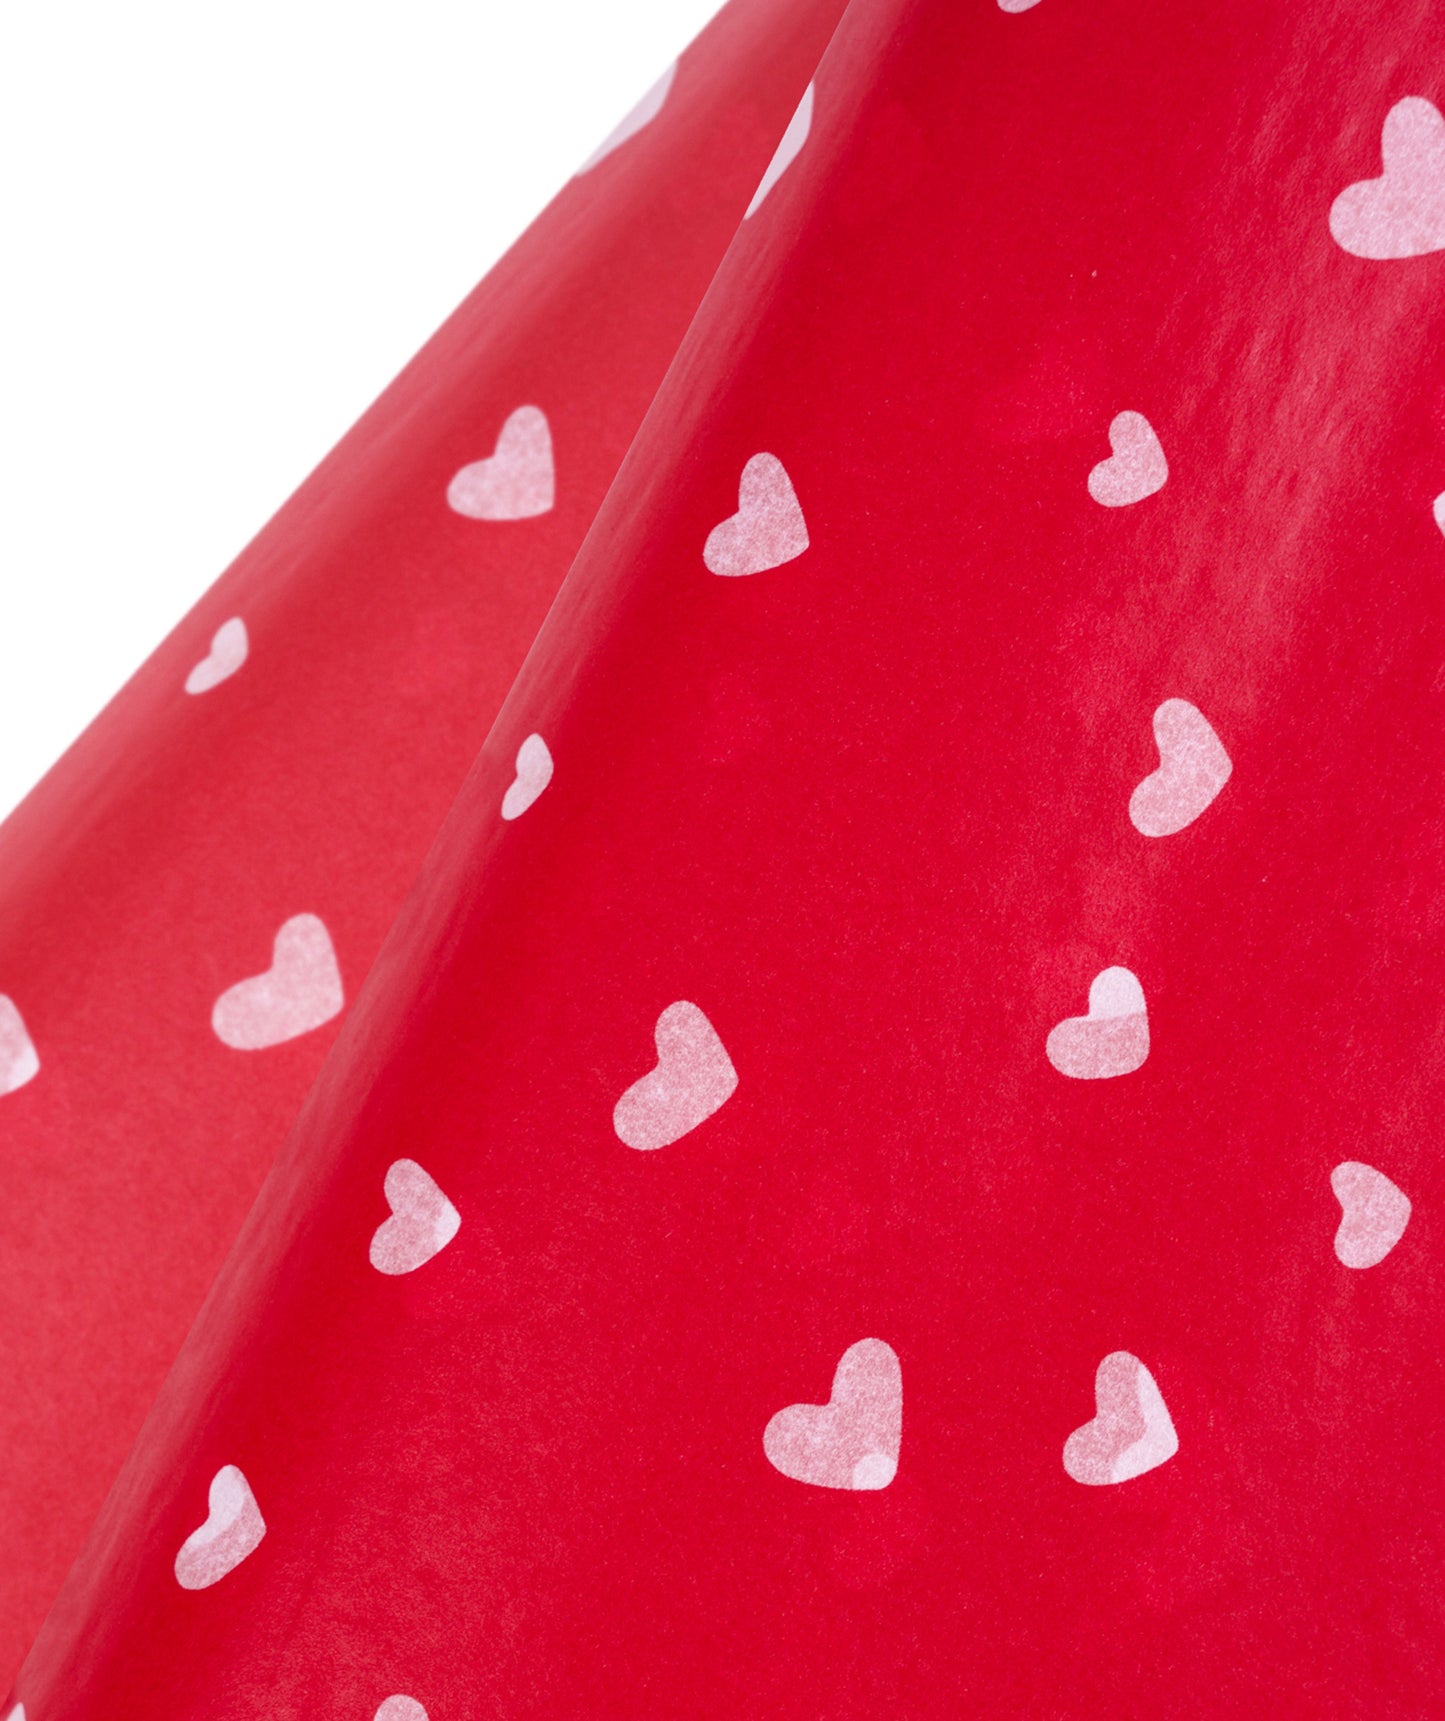 Valentine's Day Red Heart Tissue Paper 20" x 30" Bulk Wholesale Wrapaholic